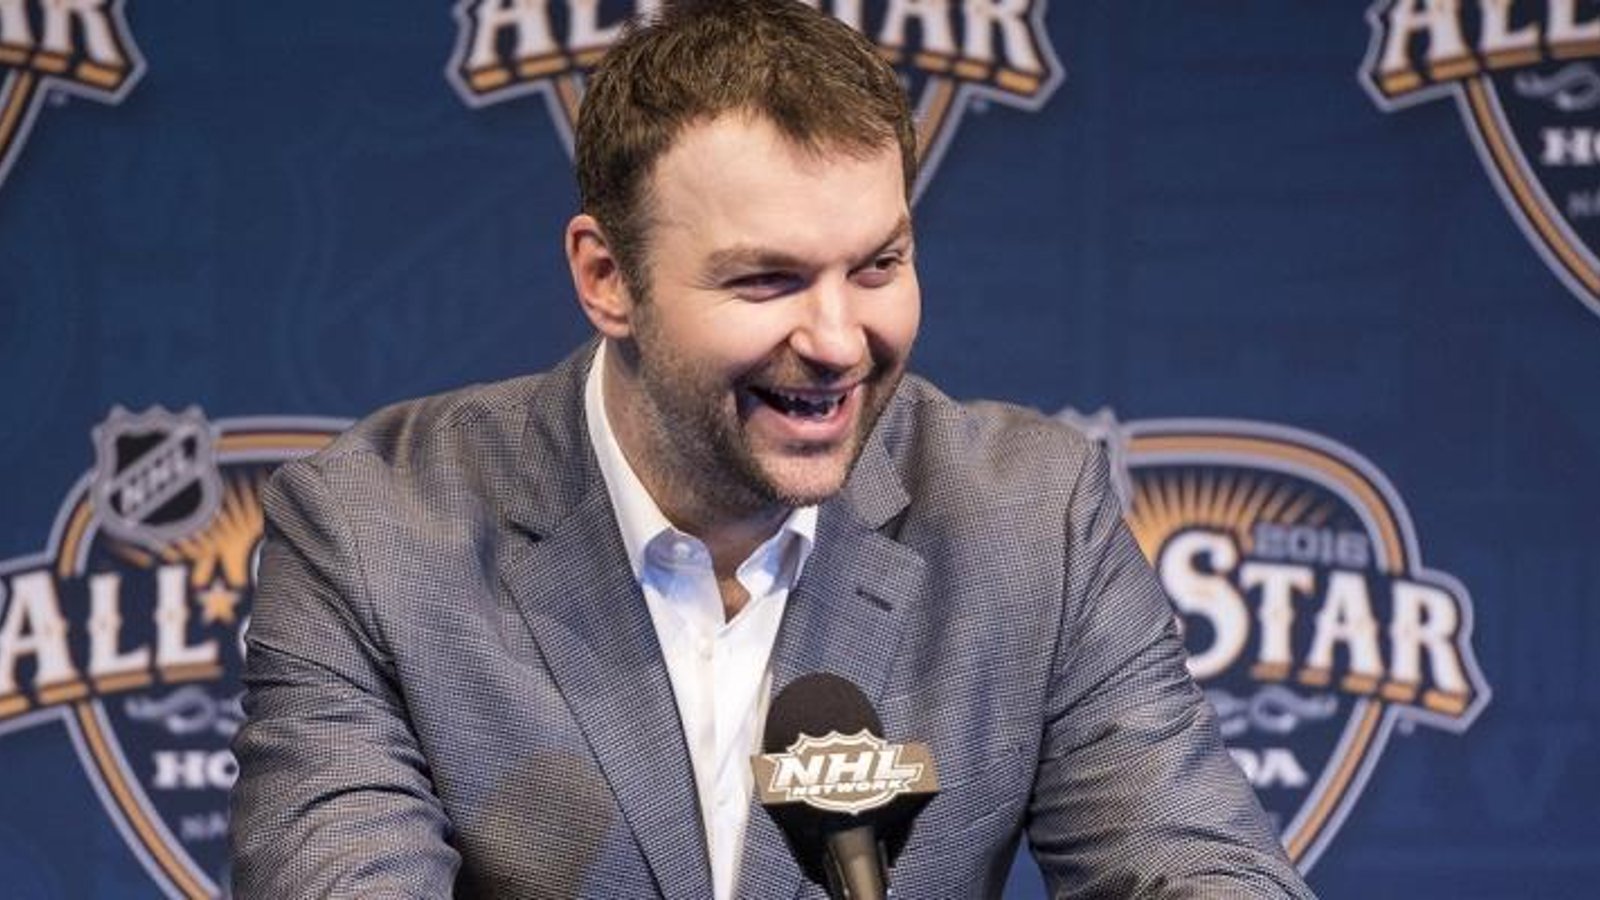 Michel Therrien sheds some light on John Scott's future in Montreal.